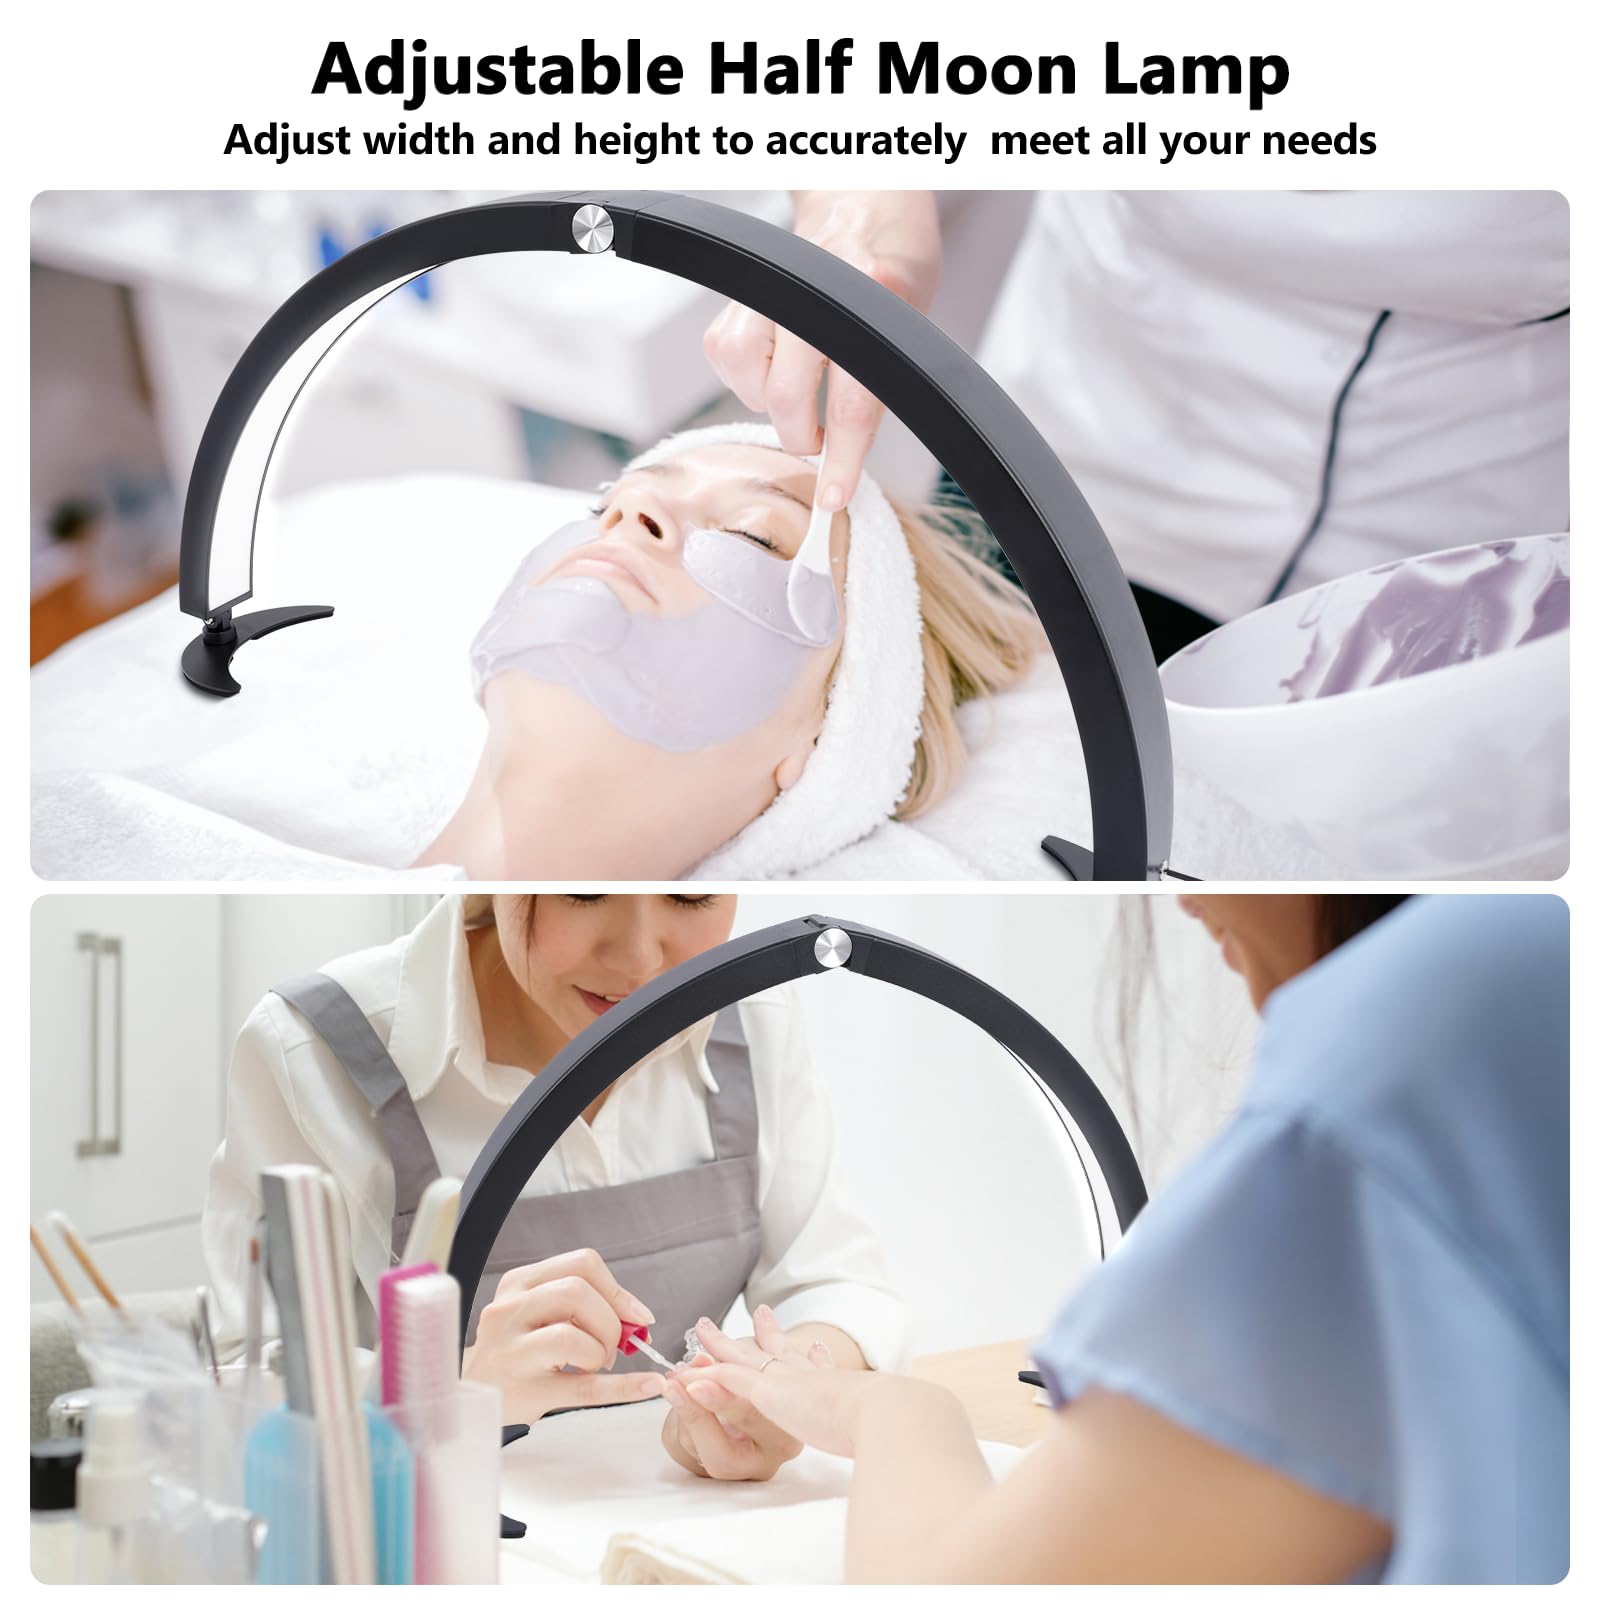 Gicrymil Half Moon Light for Nail Desk, 29in Half Moon Table Lamp Nail Desk Lamp with Wire Controller & Remote, Lash Light Lamp for Eyelash Extensions Tattoo PMU, 7 Cool/Warm Tones & 10 Brightness